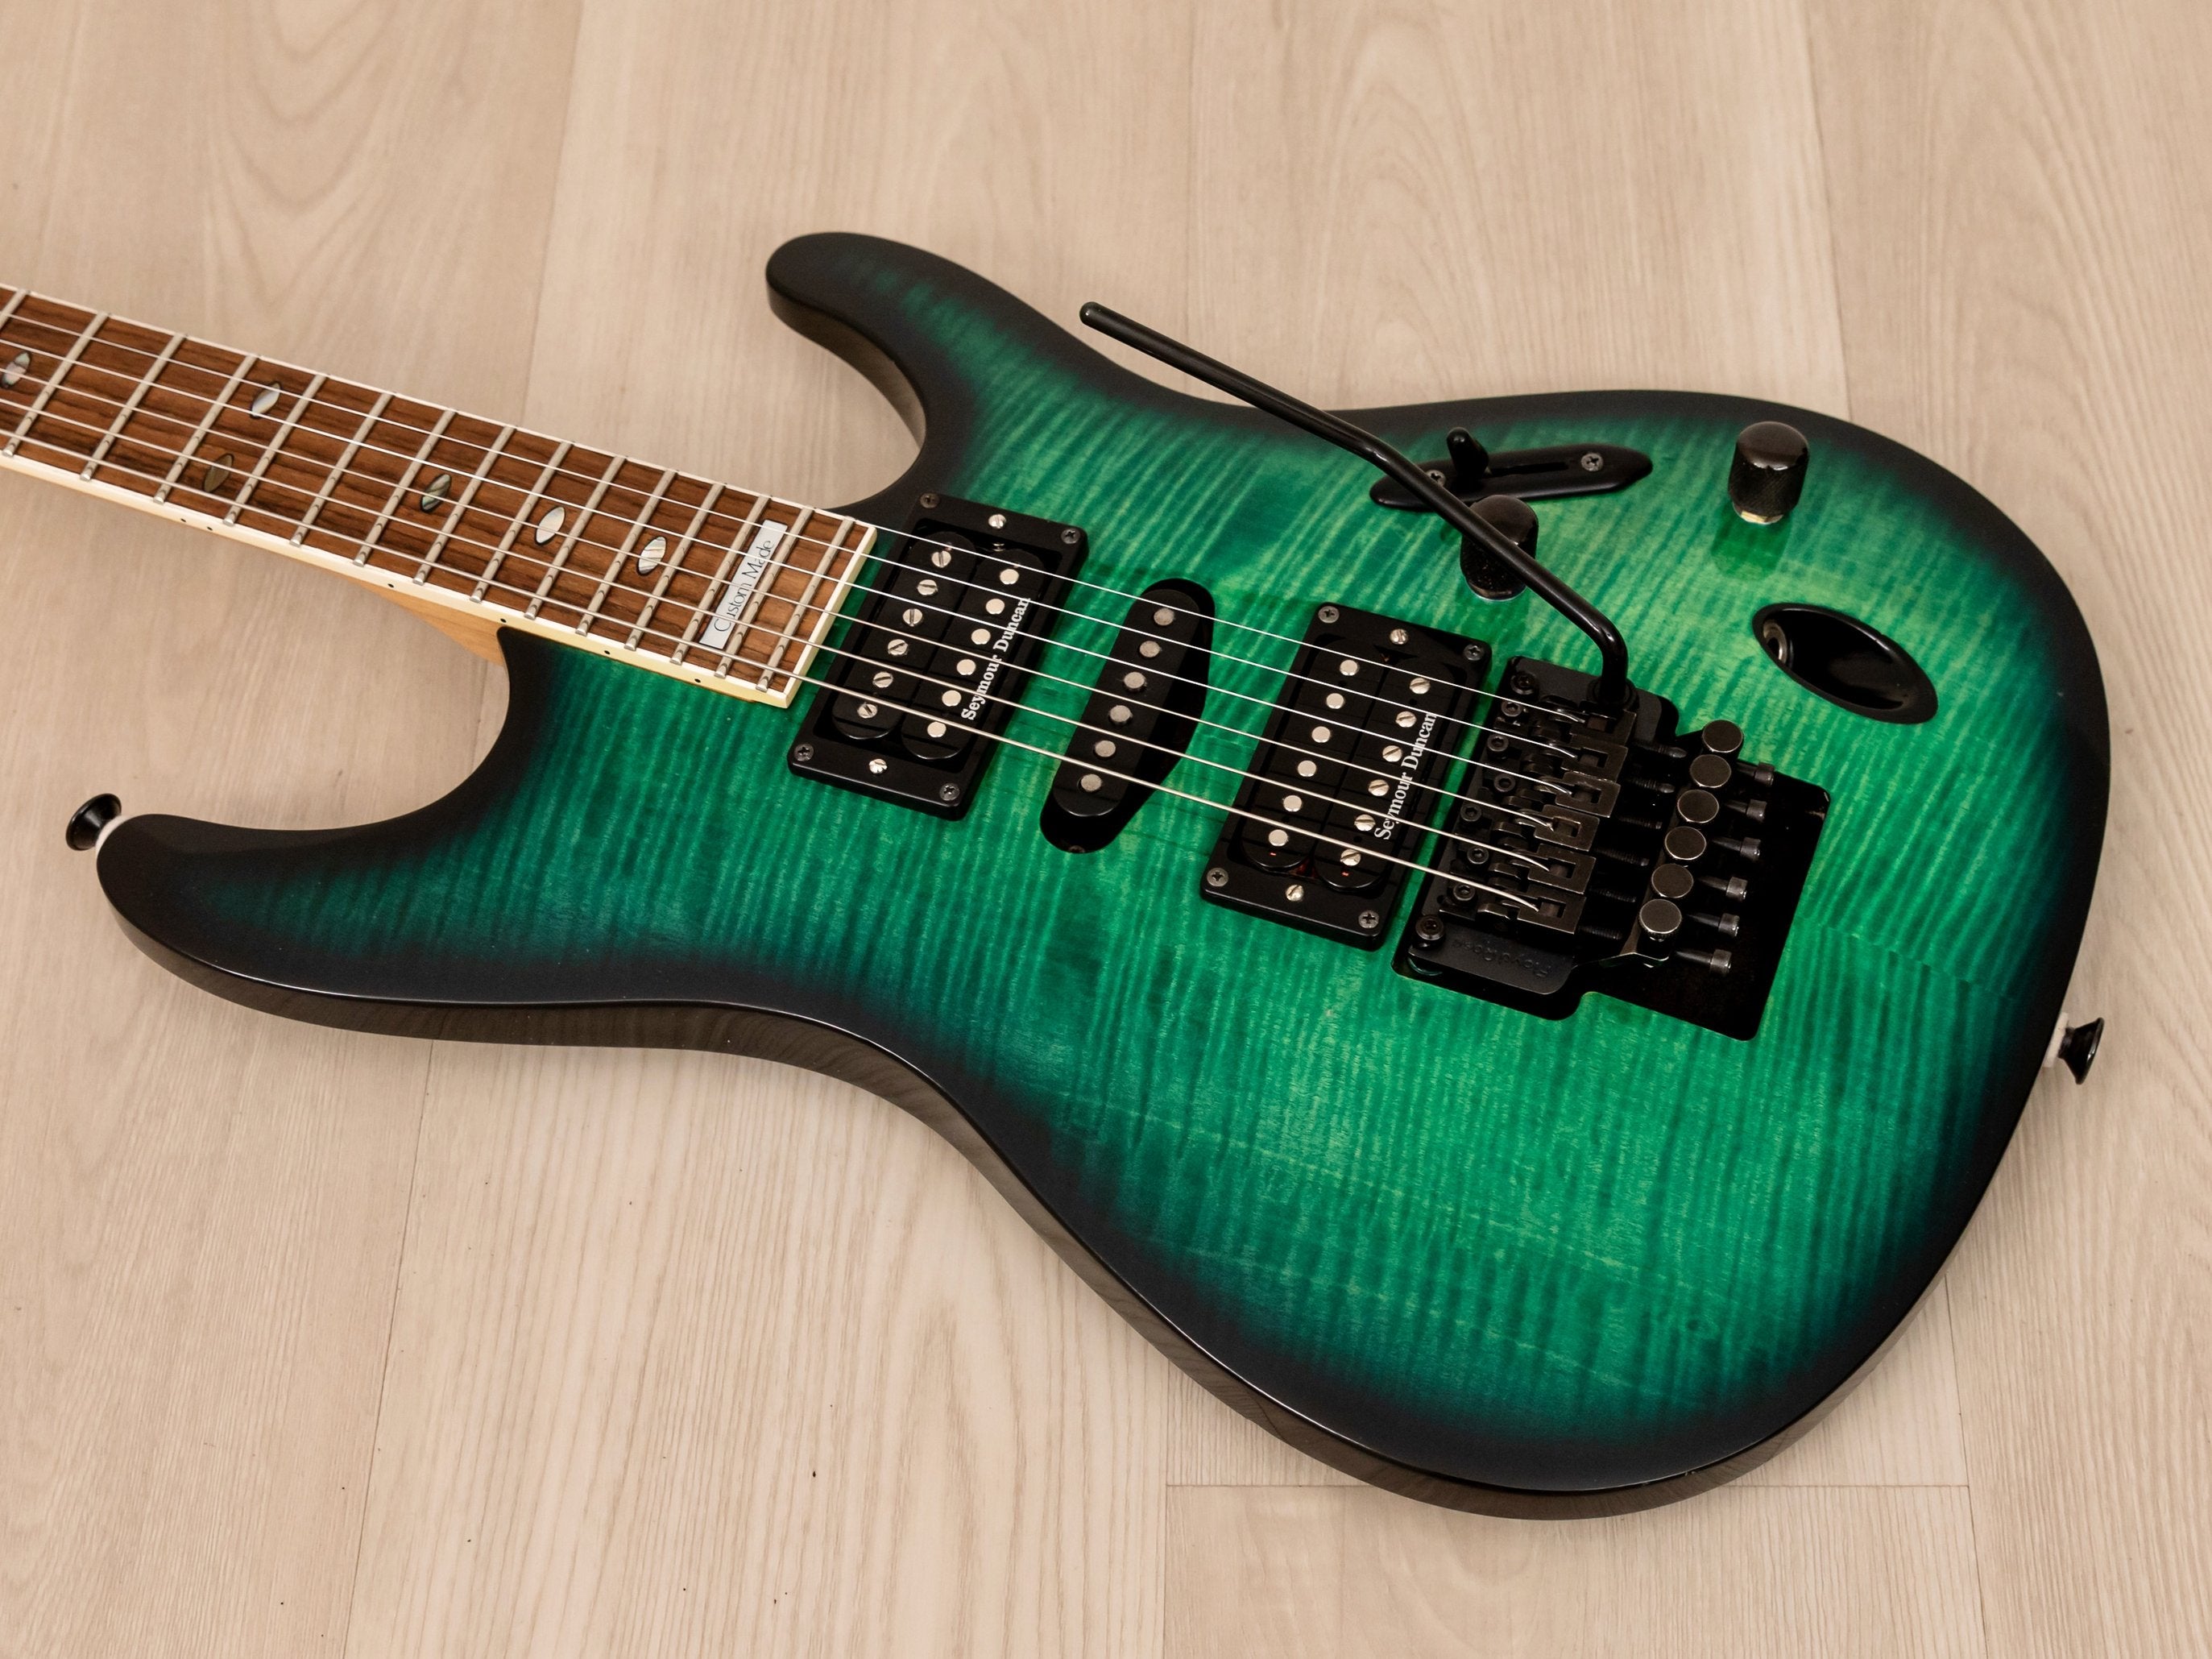 1995 Ibanez S540FM S Series Electric Guitar HSH Transparent Turquoise w/ USA Seymour Duncans & Floyd Rose, Japan